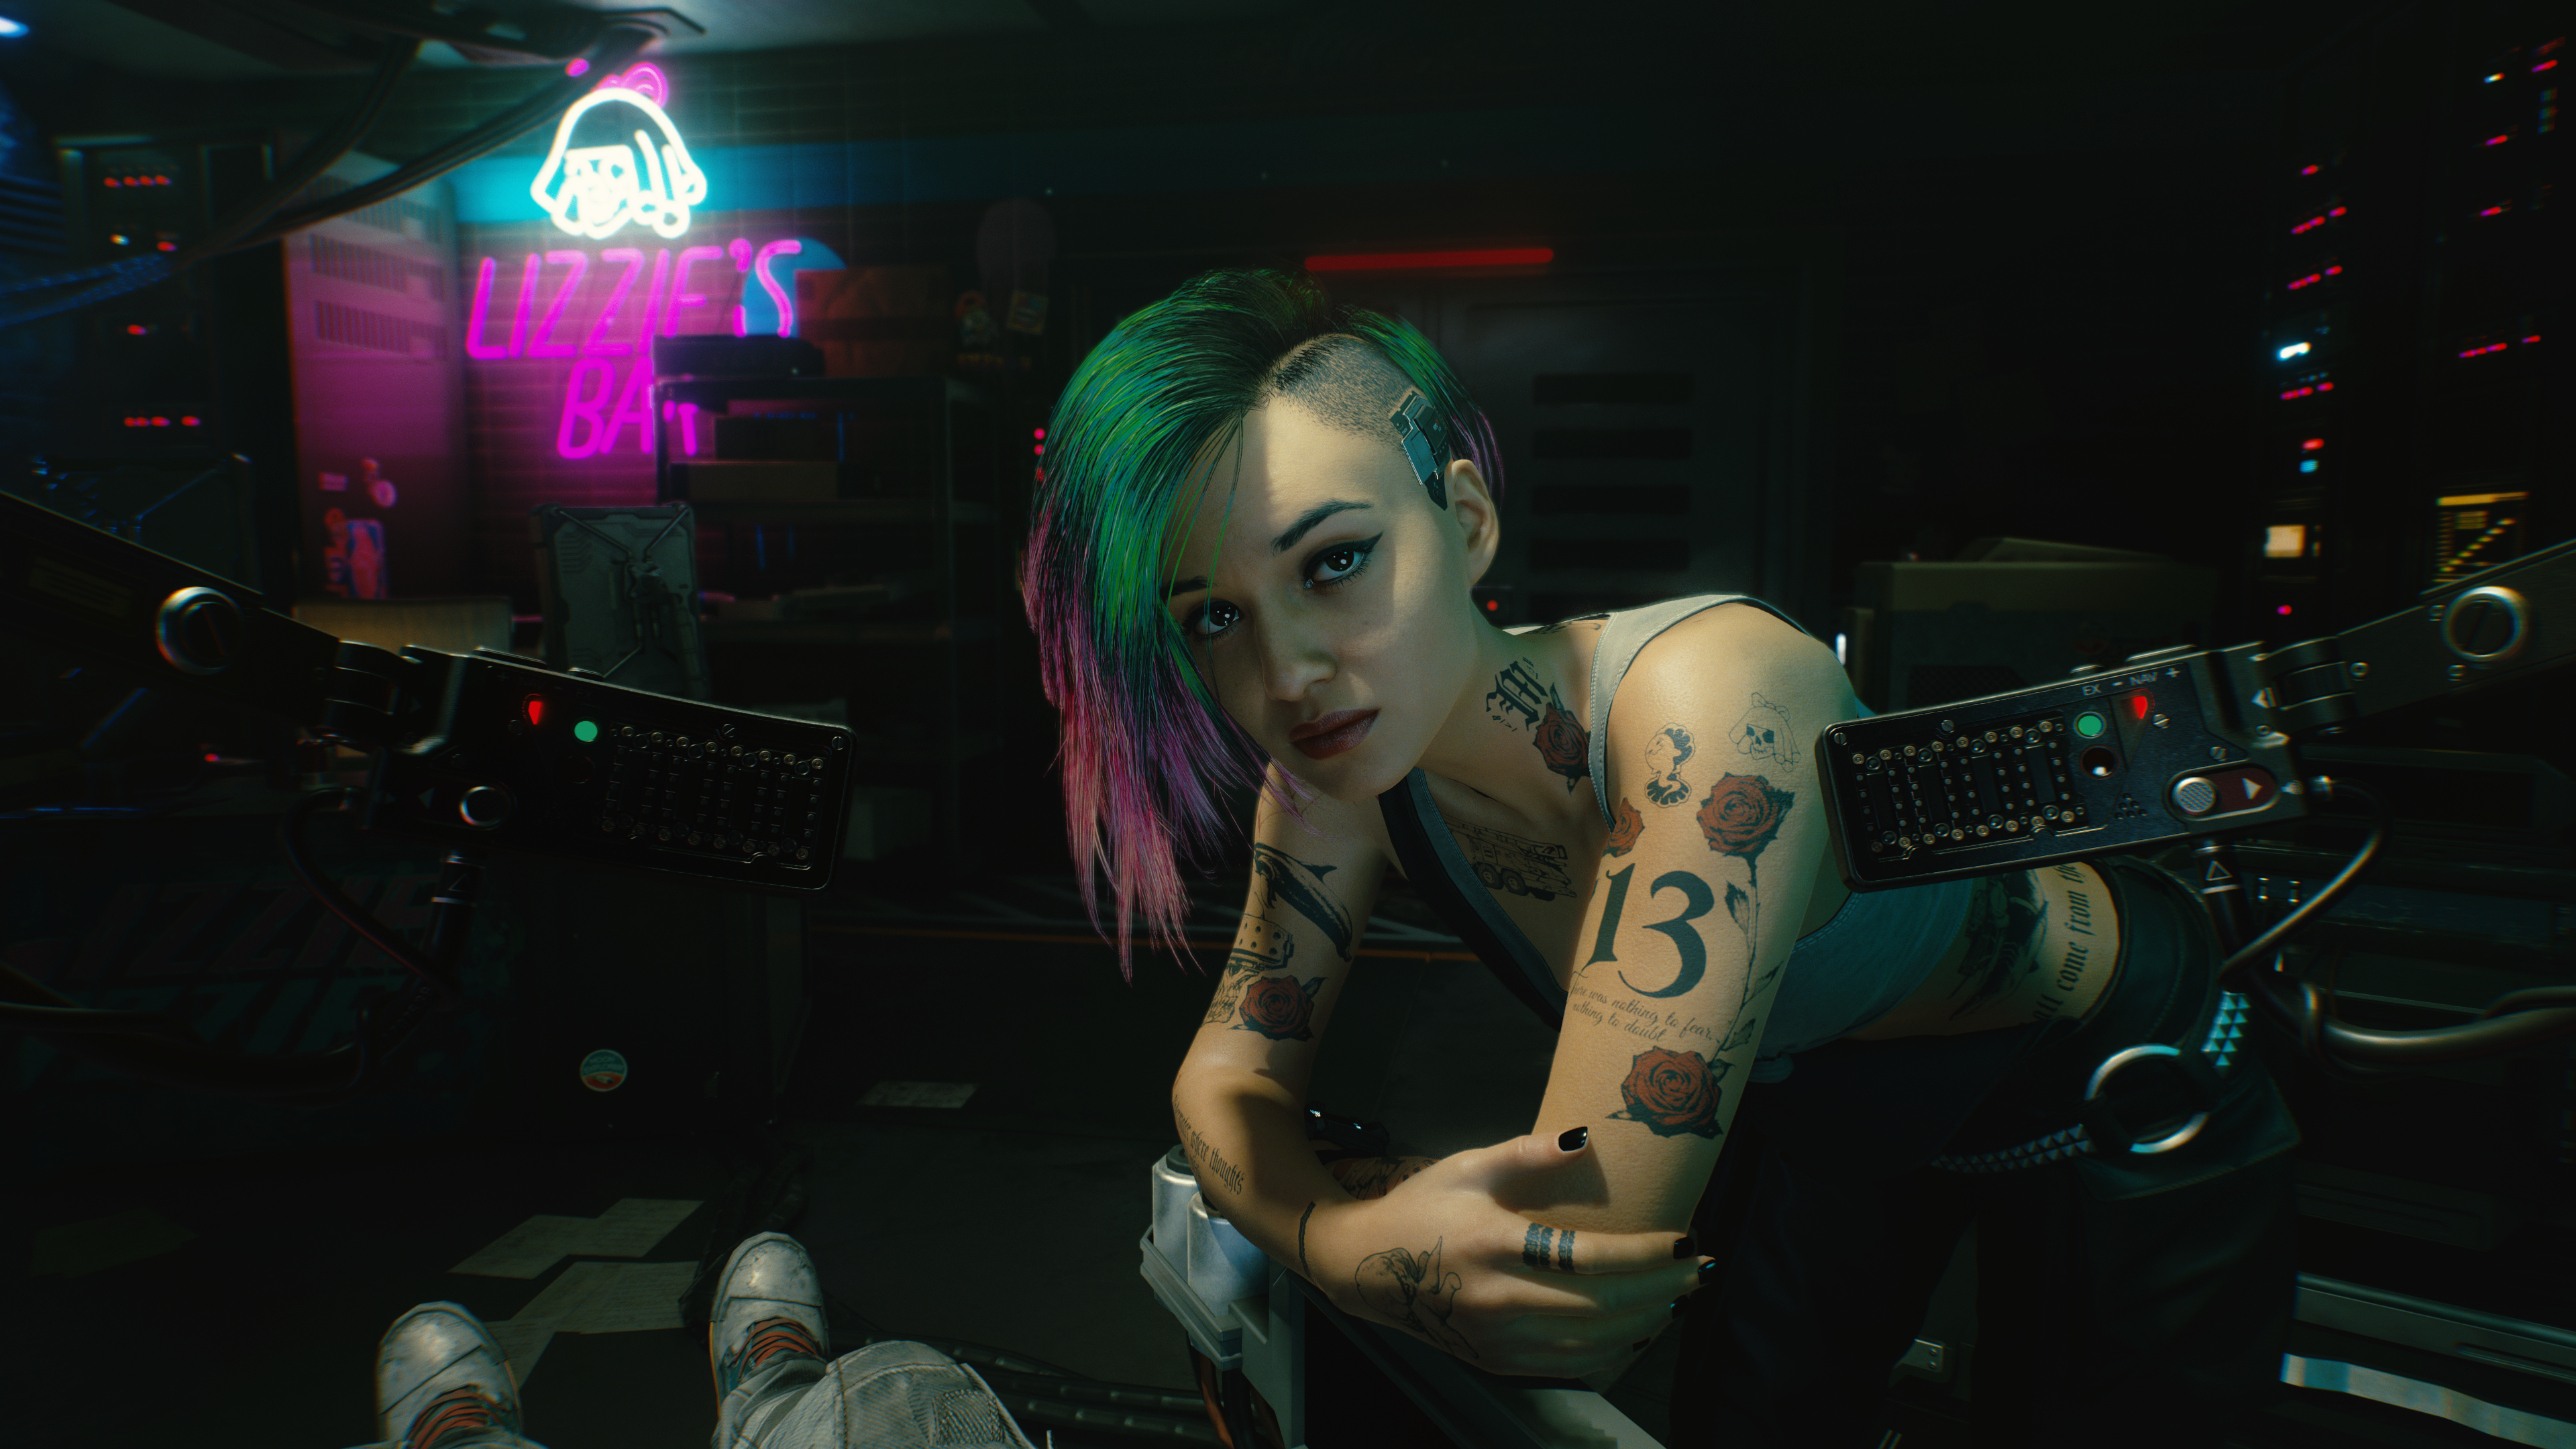 One of the characters in Cyberpunk 2077 has a Radiohead tattoo | VG247